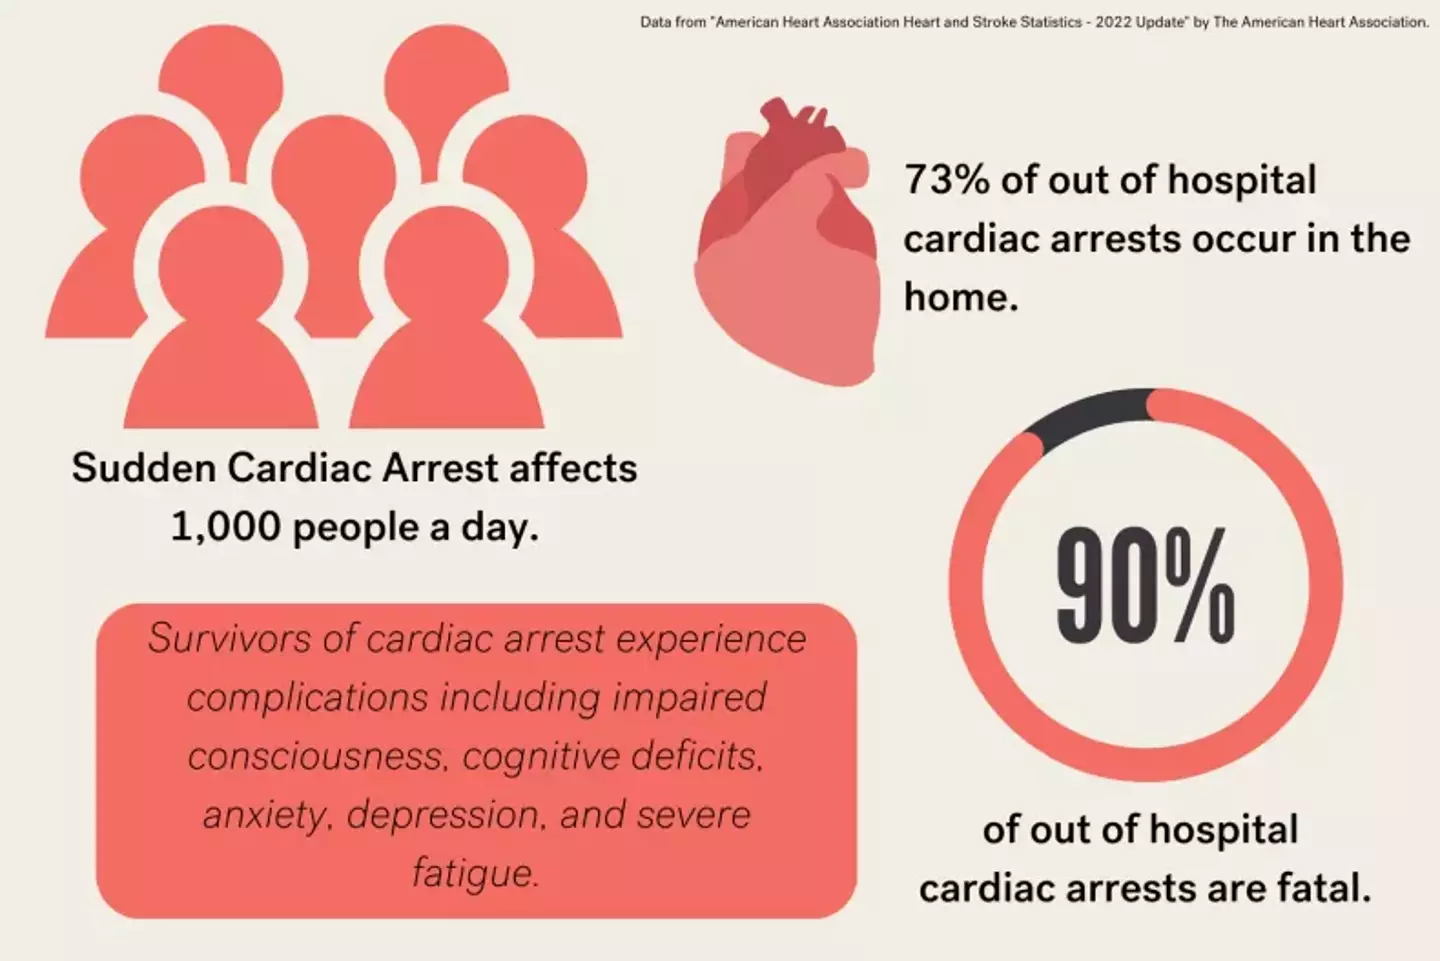 US Heart Disease and Stroke Statistics from 2022.